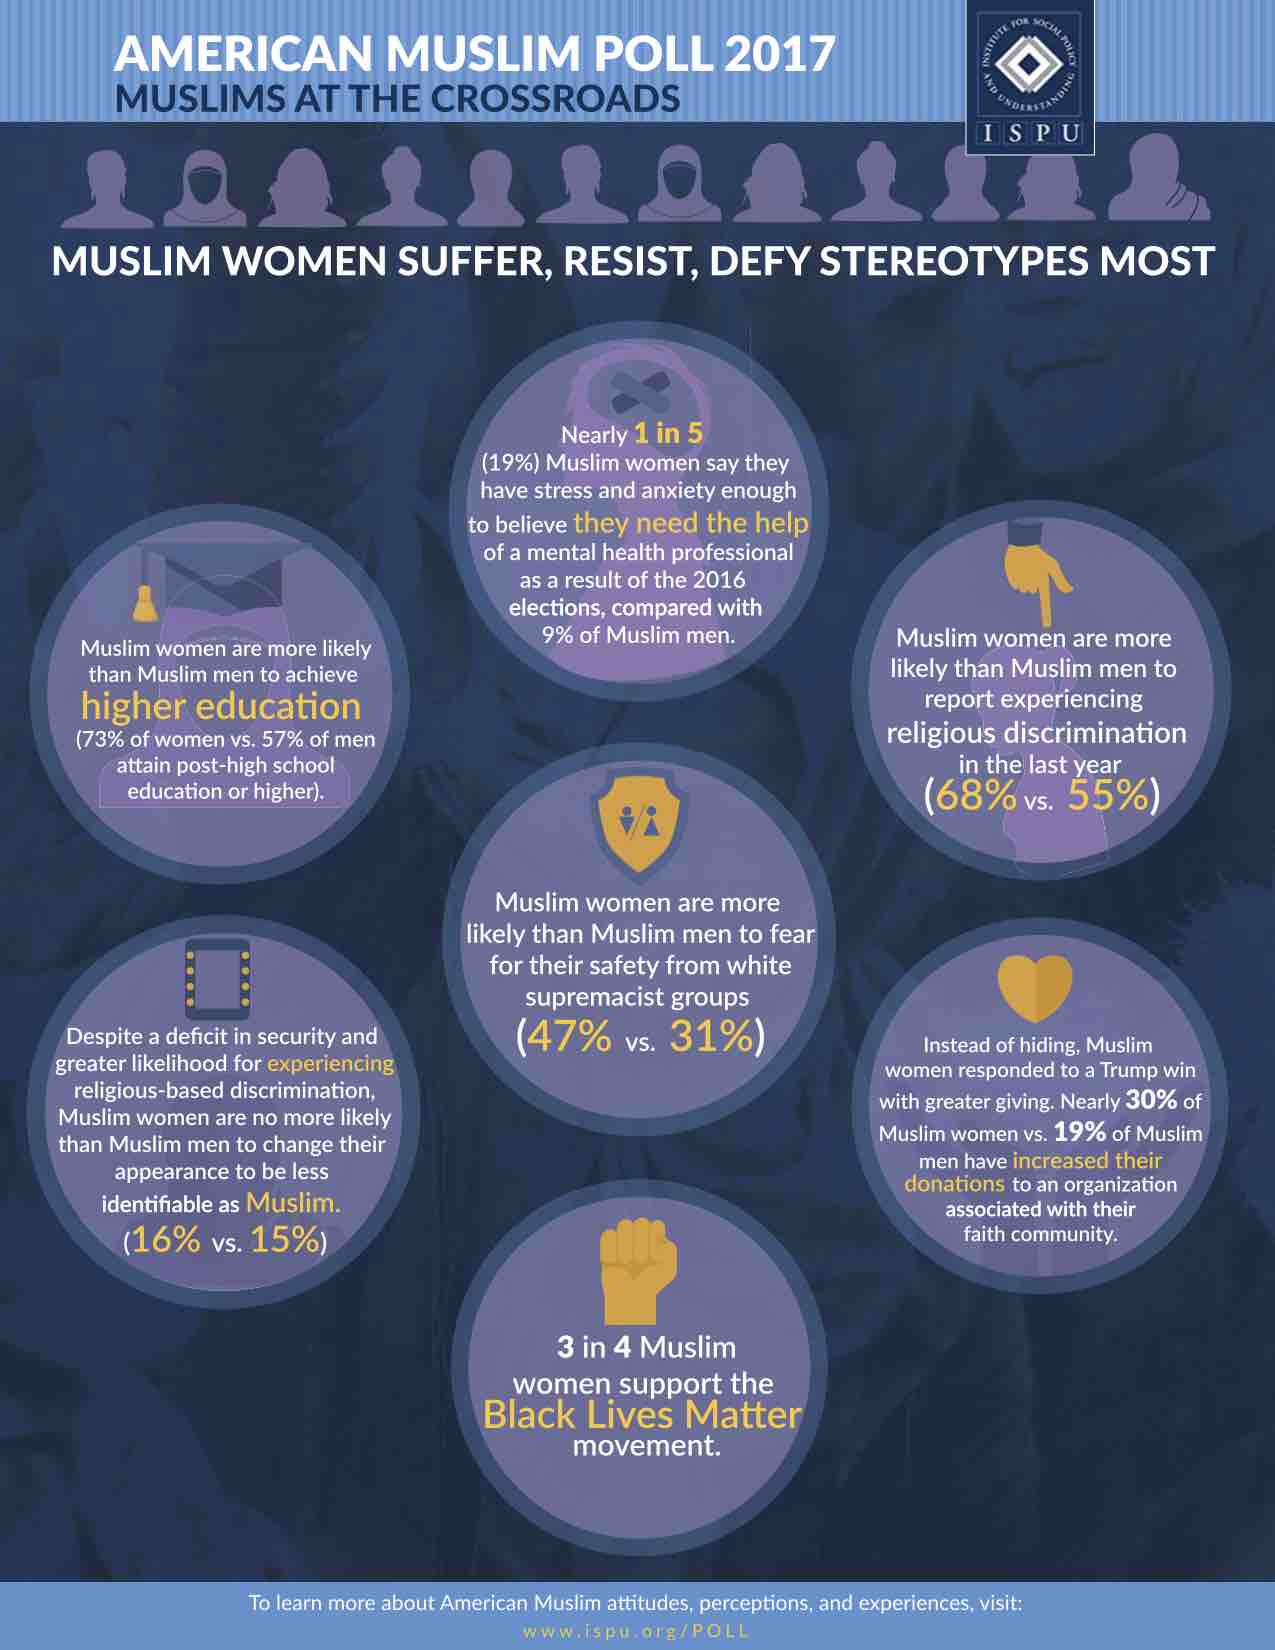 Infographic showing Muslim Women Suffer, Resist, Defy Stereotypes Most